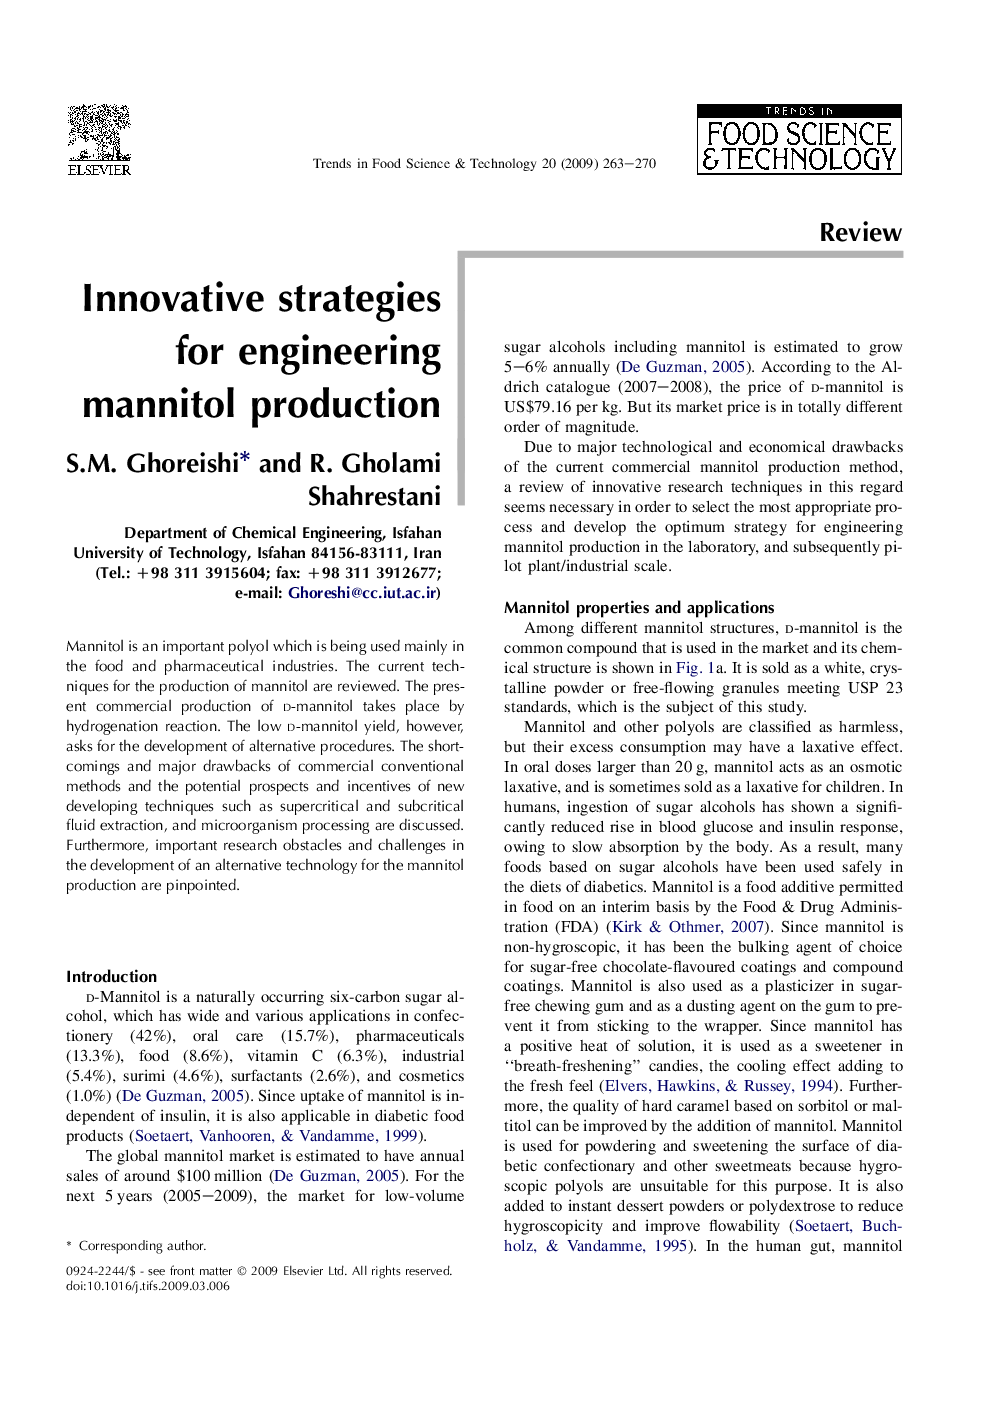 Innovative strategies for engineering mannitol production